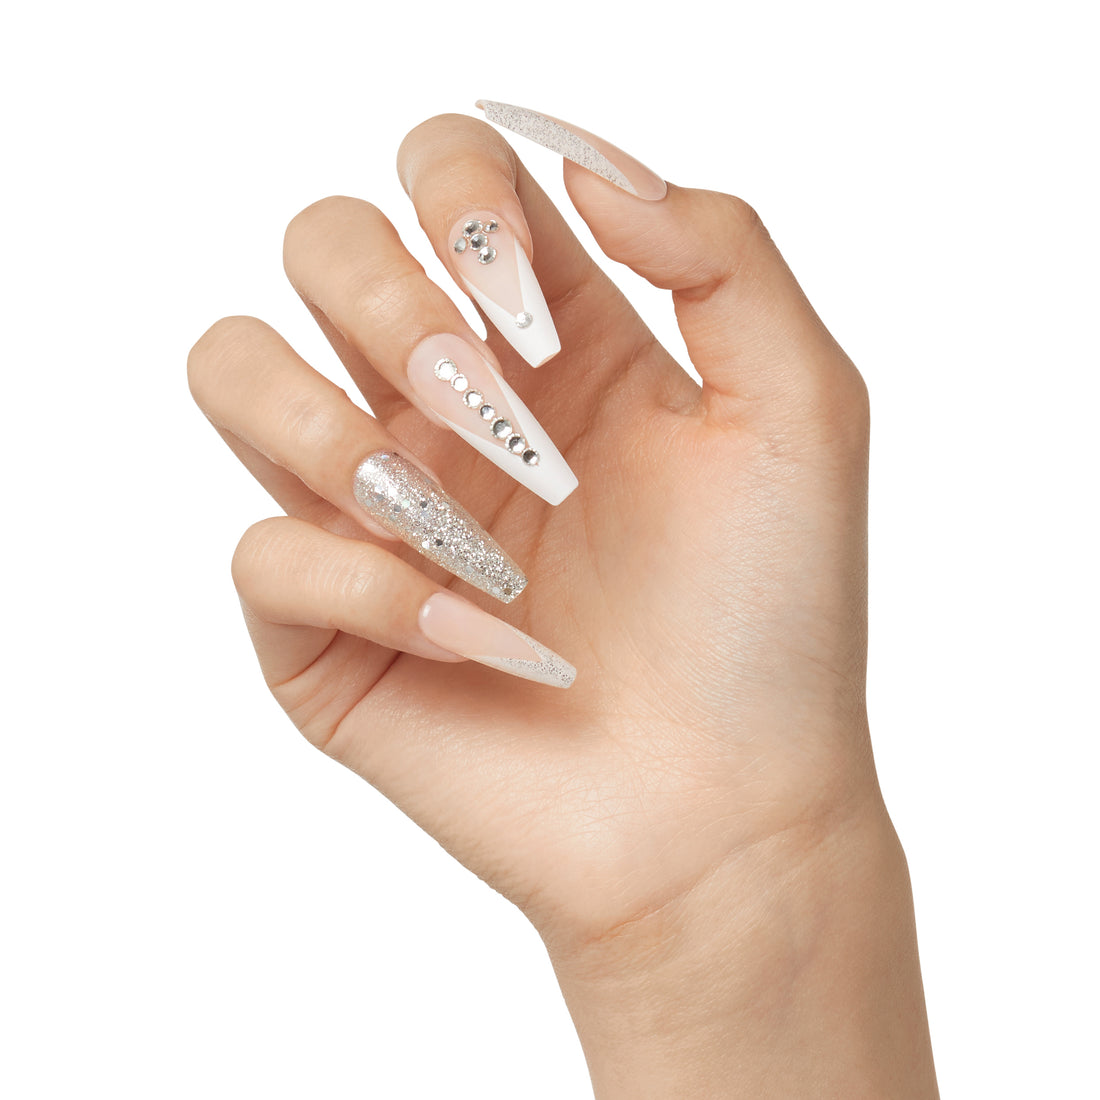 KISS Premium Classy Nails - Sophisticated